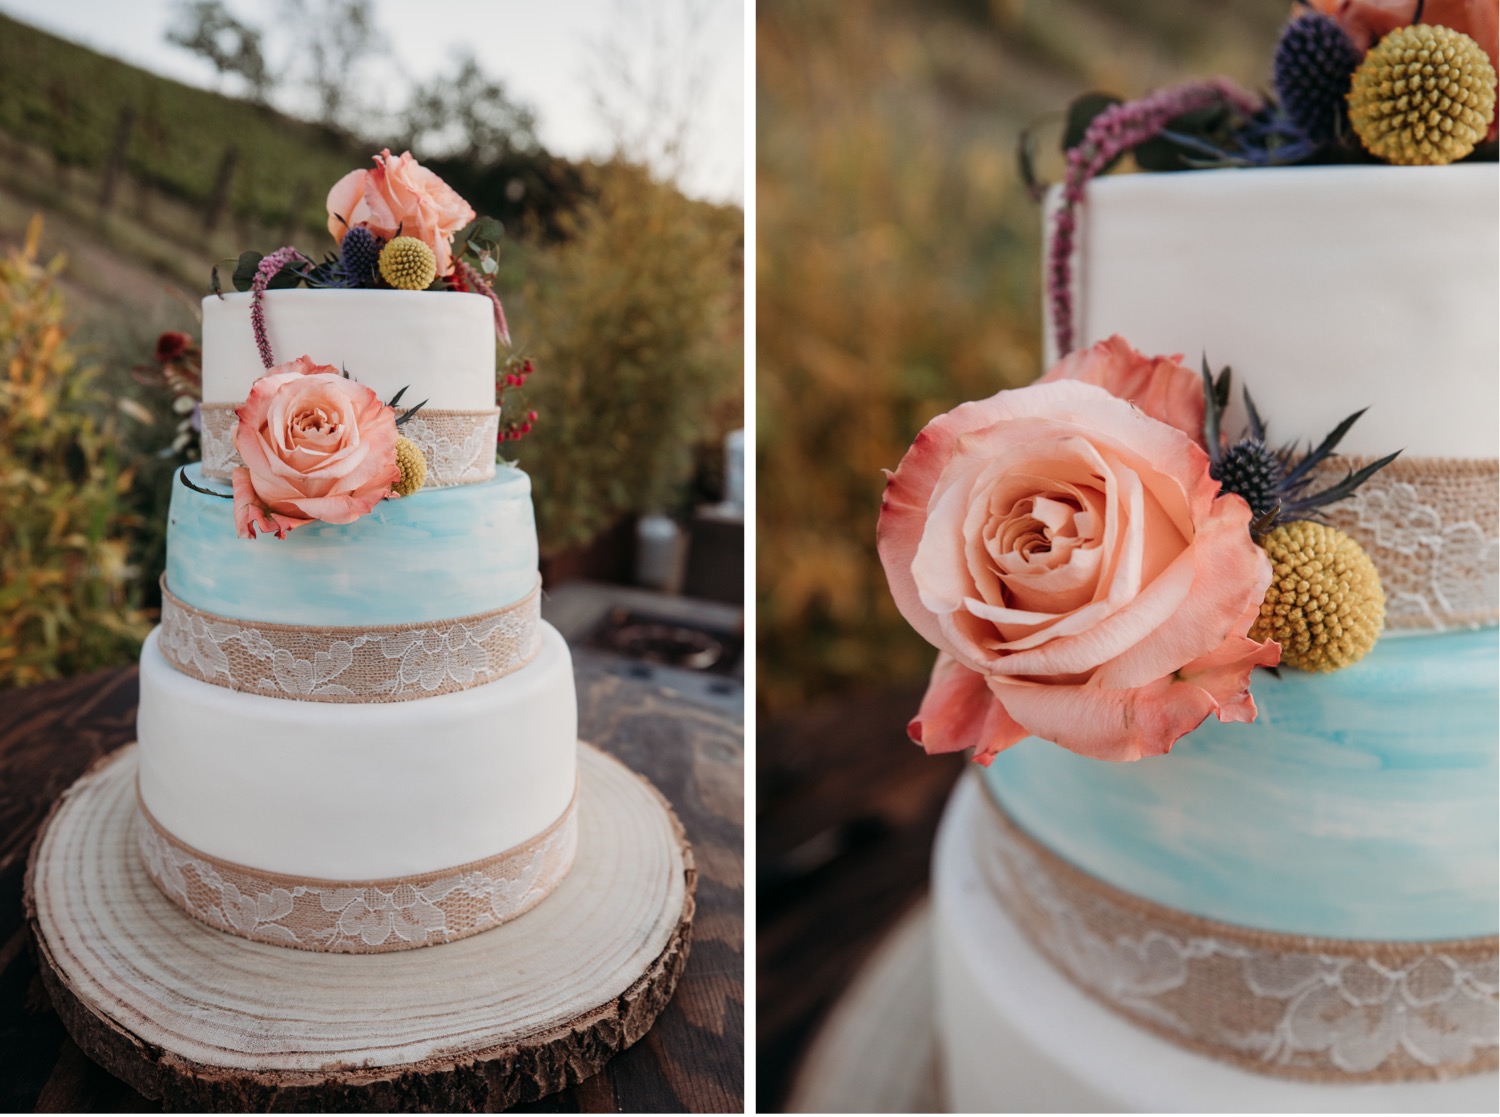 Wedding cake photo with blue and white frosting and pink flowers. Liz Koston Photography.